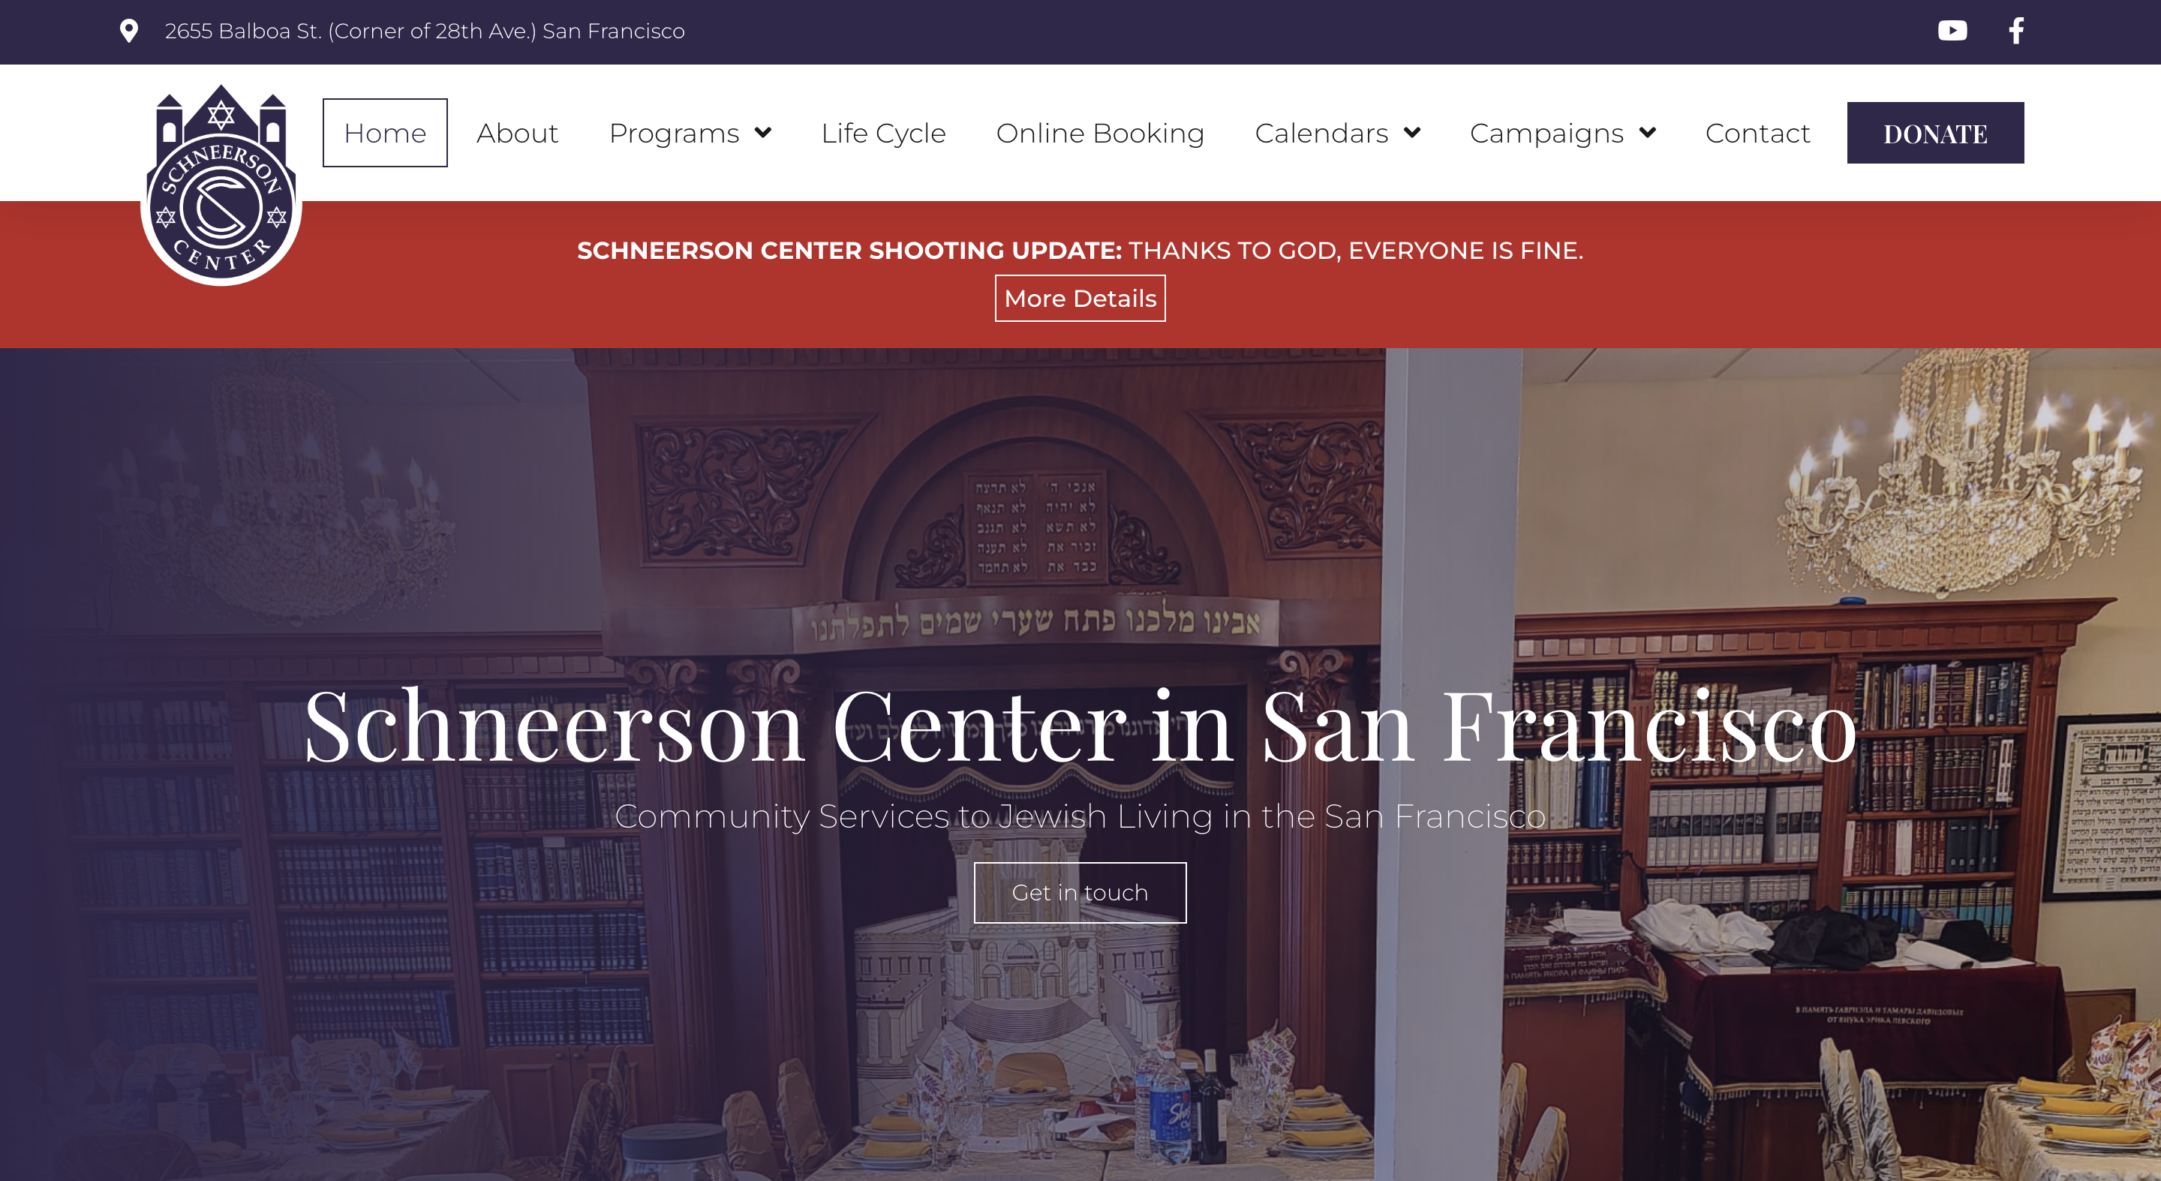 Man arrested in shooting at San Francisco Jewish center, charged with drawing imitation firearm